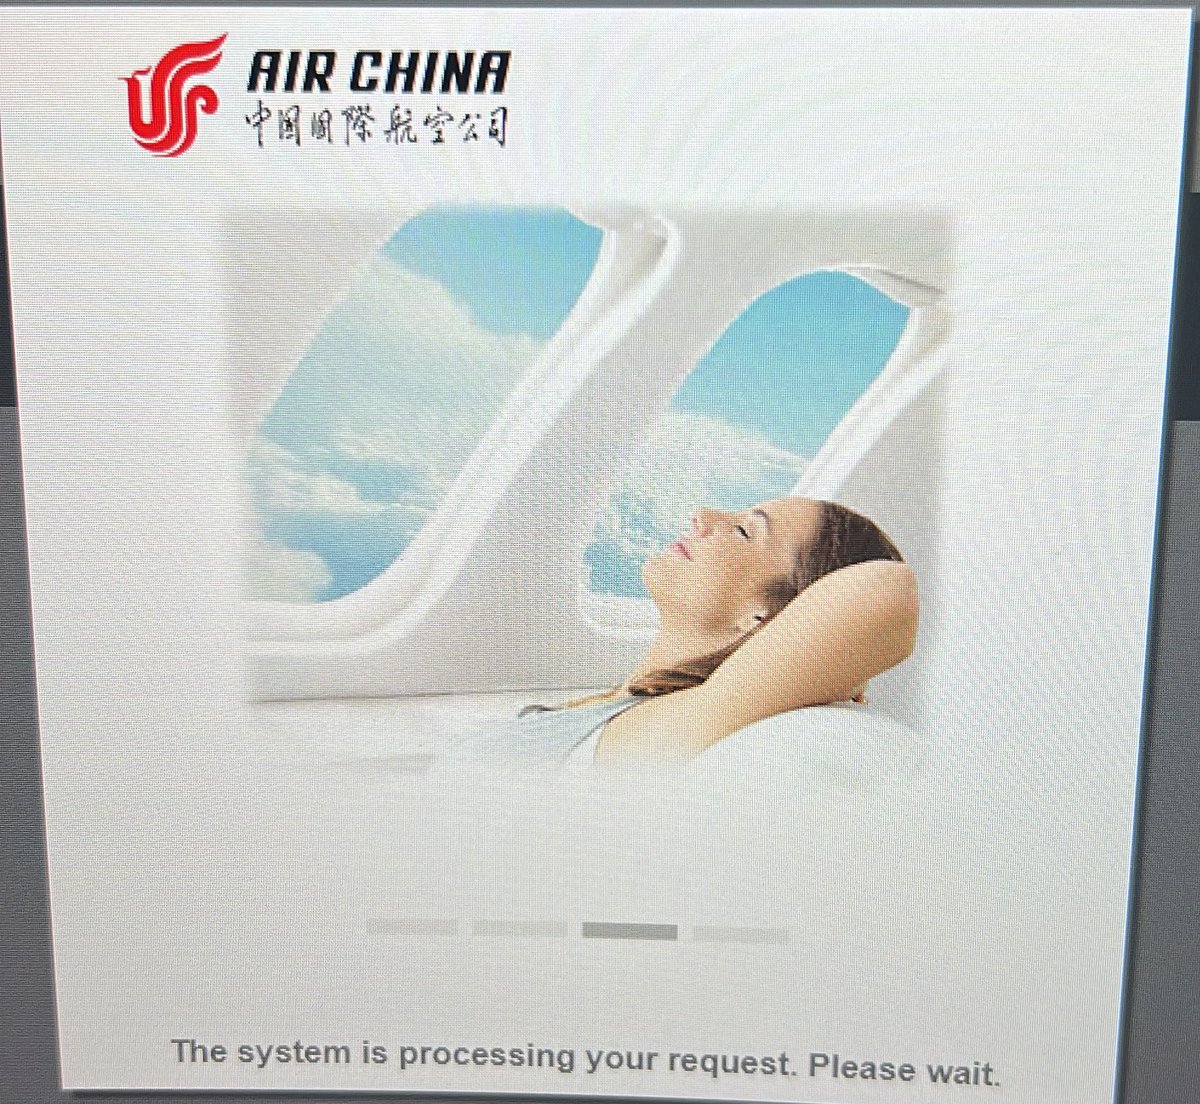 What’s the general feel of flying Air China? Good or bad experiences? #flights #airlines #travel #TravelAdvice #traveltips